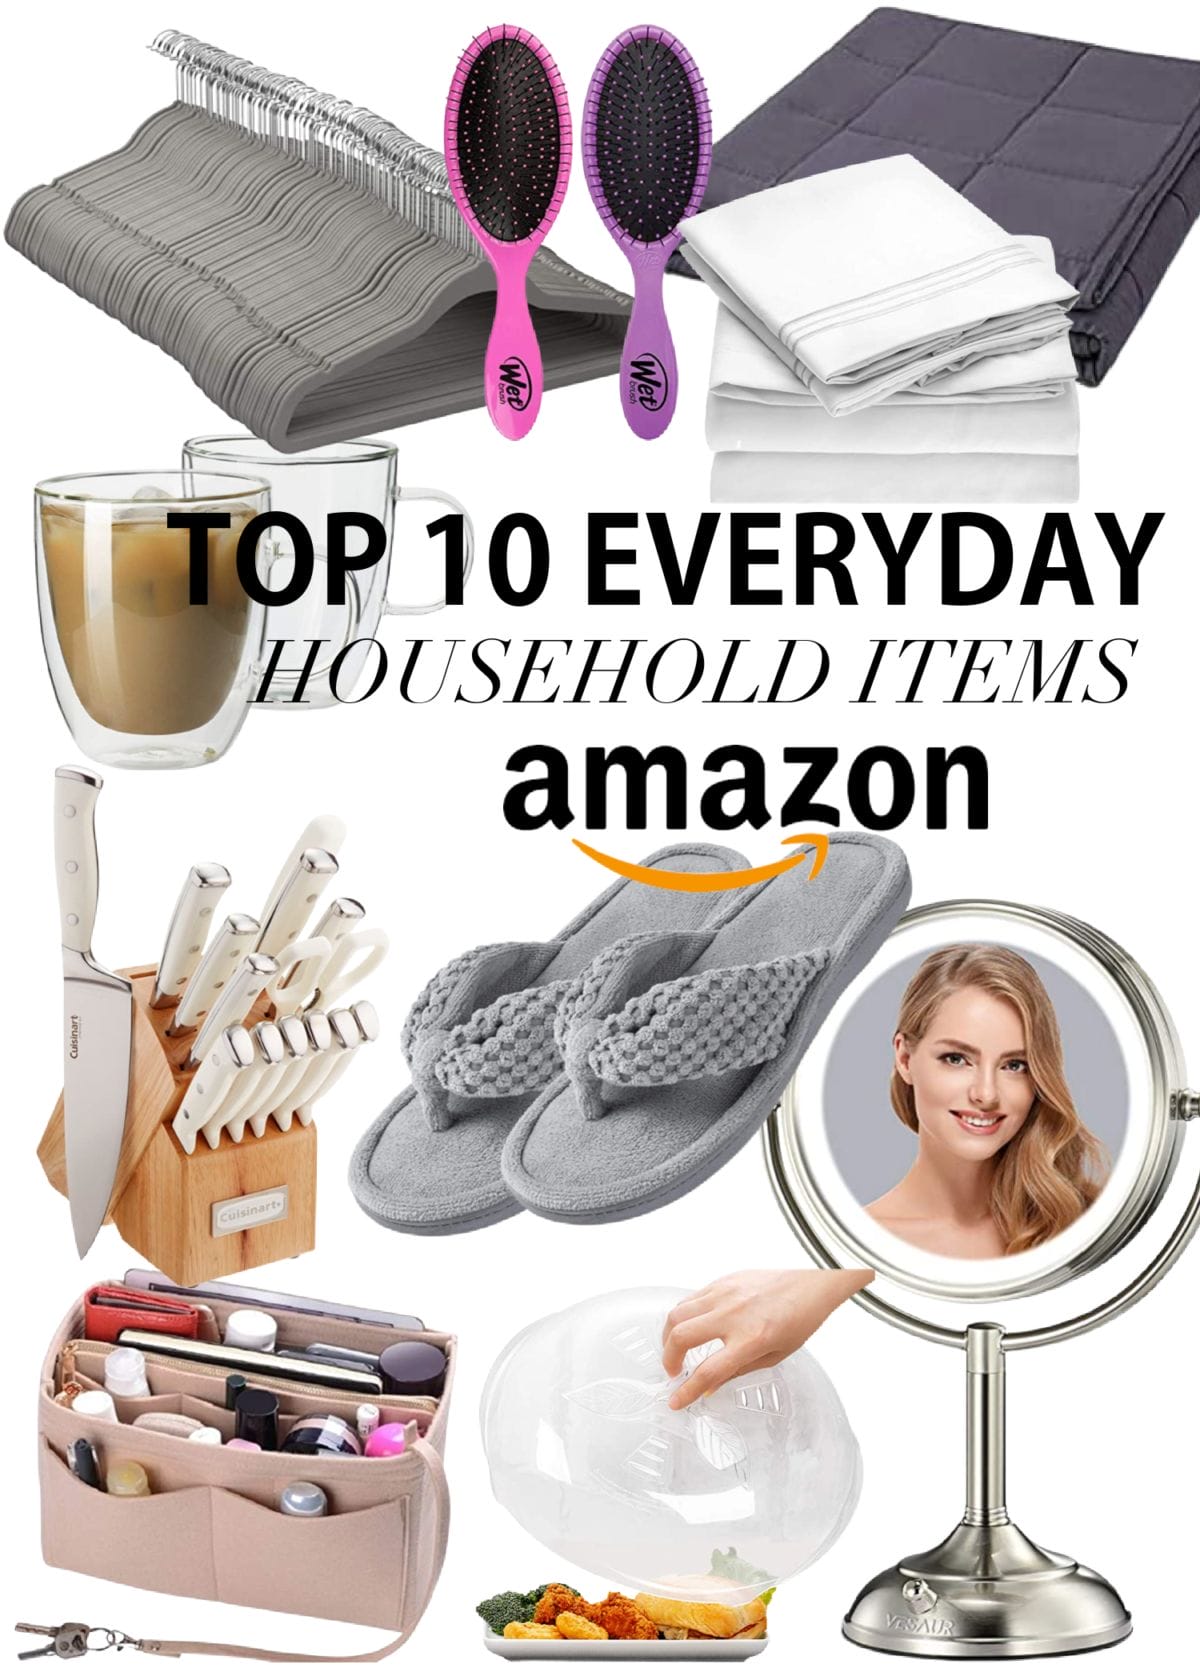 https://eb2pgoq5kpf.exactdn.com/wp-content/uploads/2021/04/Top-10-Everyday-Household-Items-from-Amazon-1200x1680.png?strip=all&lossy=1&ssl=1